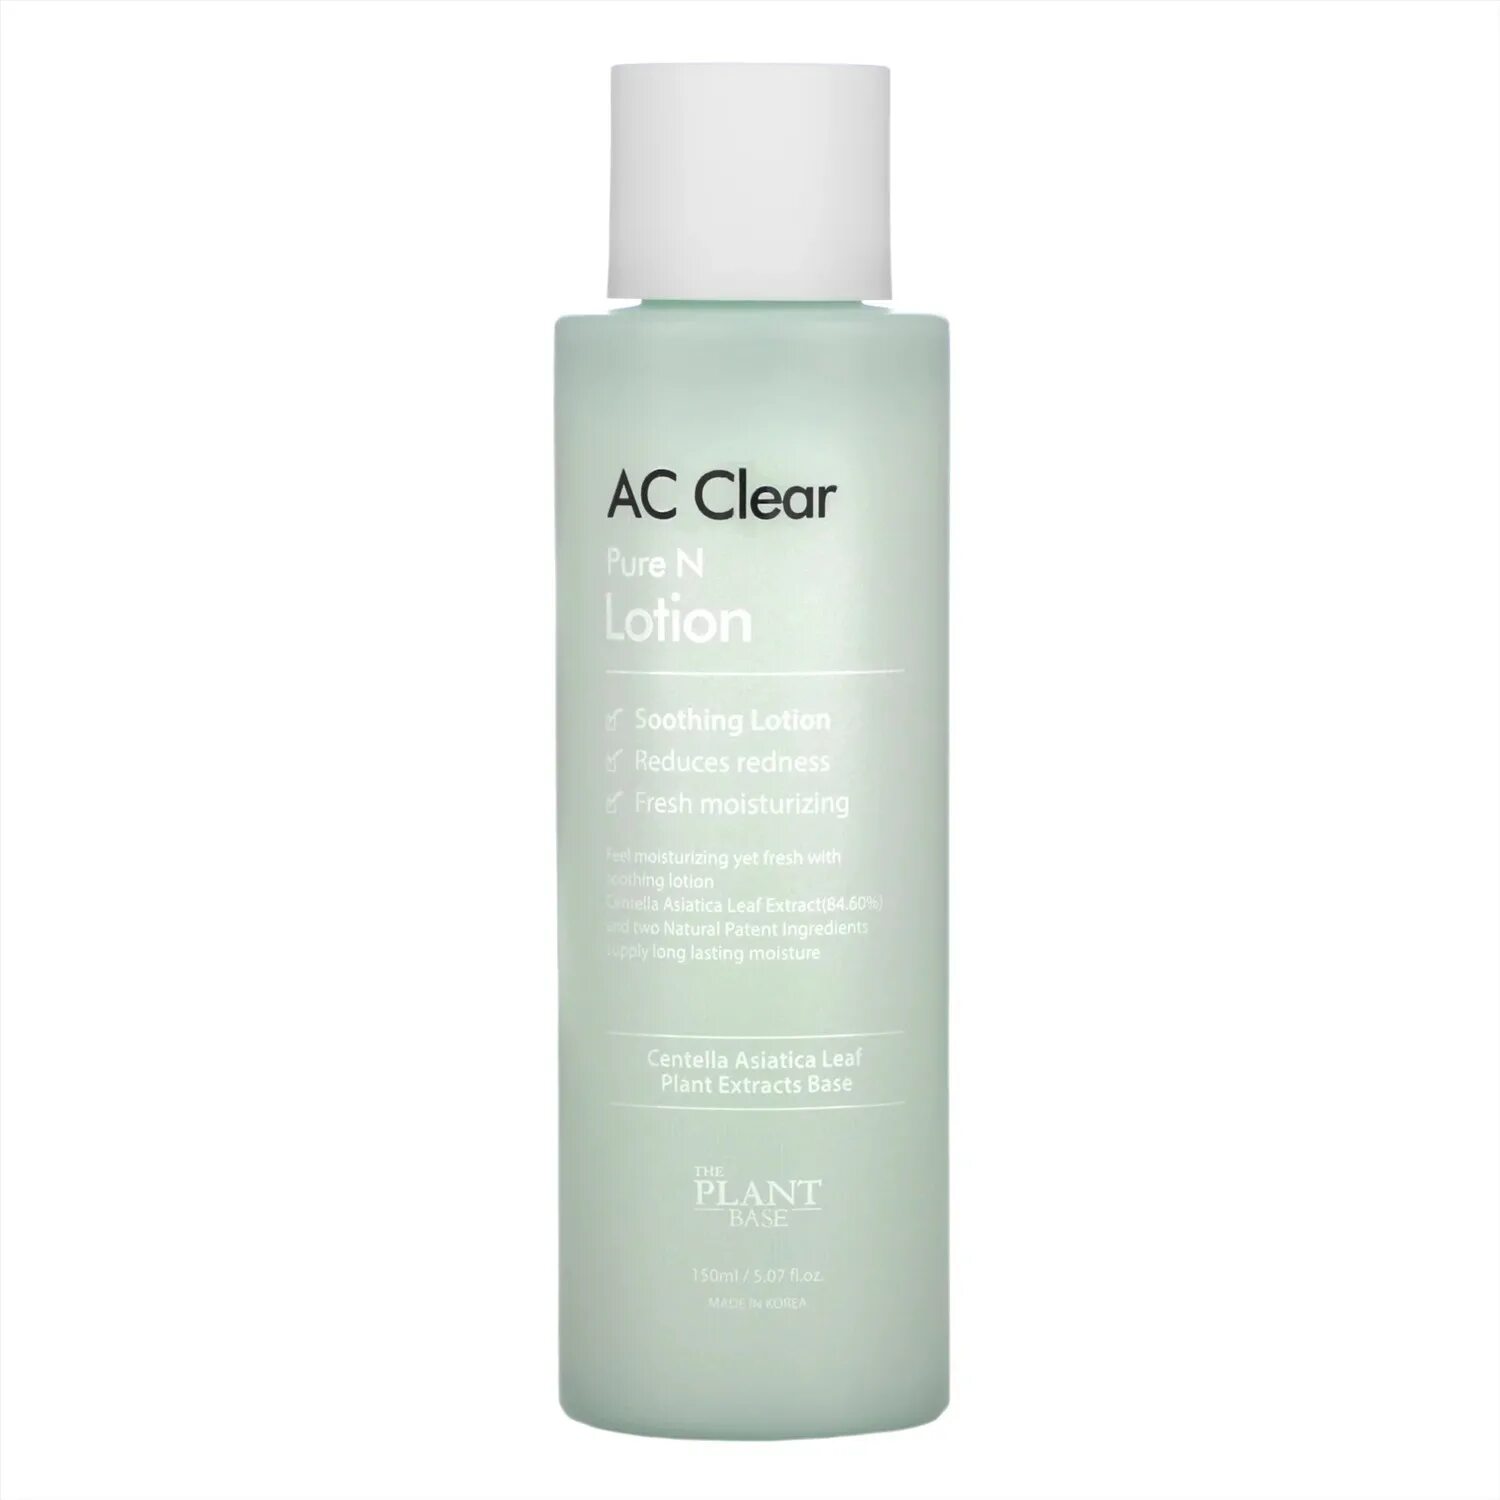 Ac clear. AC Clear Pure. MT Metatron first Step Lotion базовый лосьон 150 мл. The Plant Base AC Clear Pure n Skin. AC Clear Moisture.